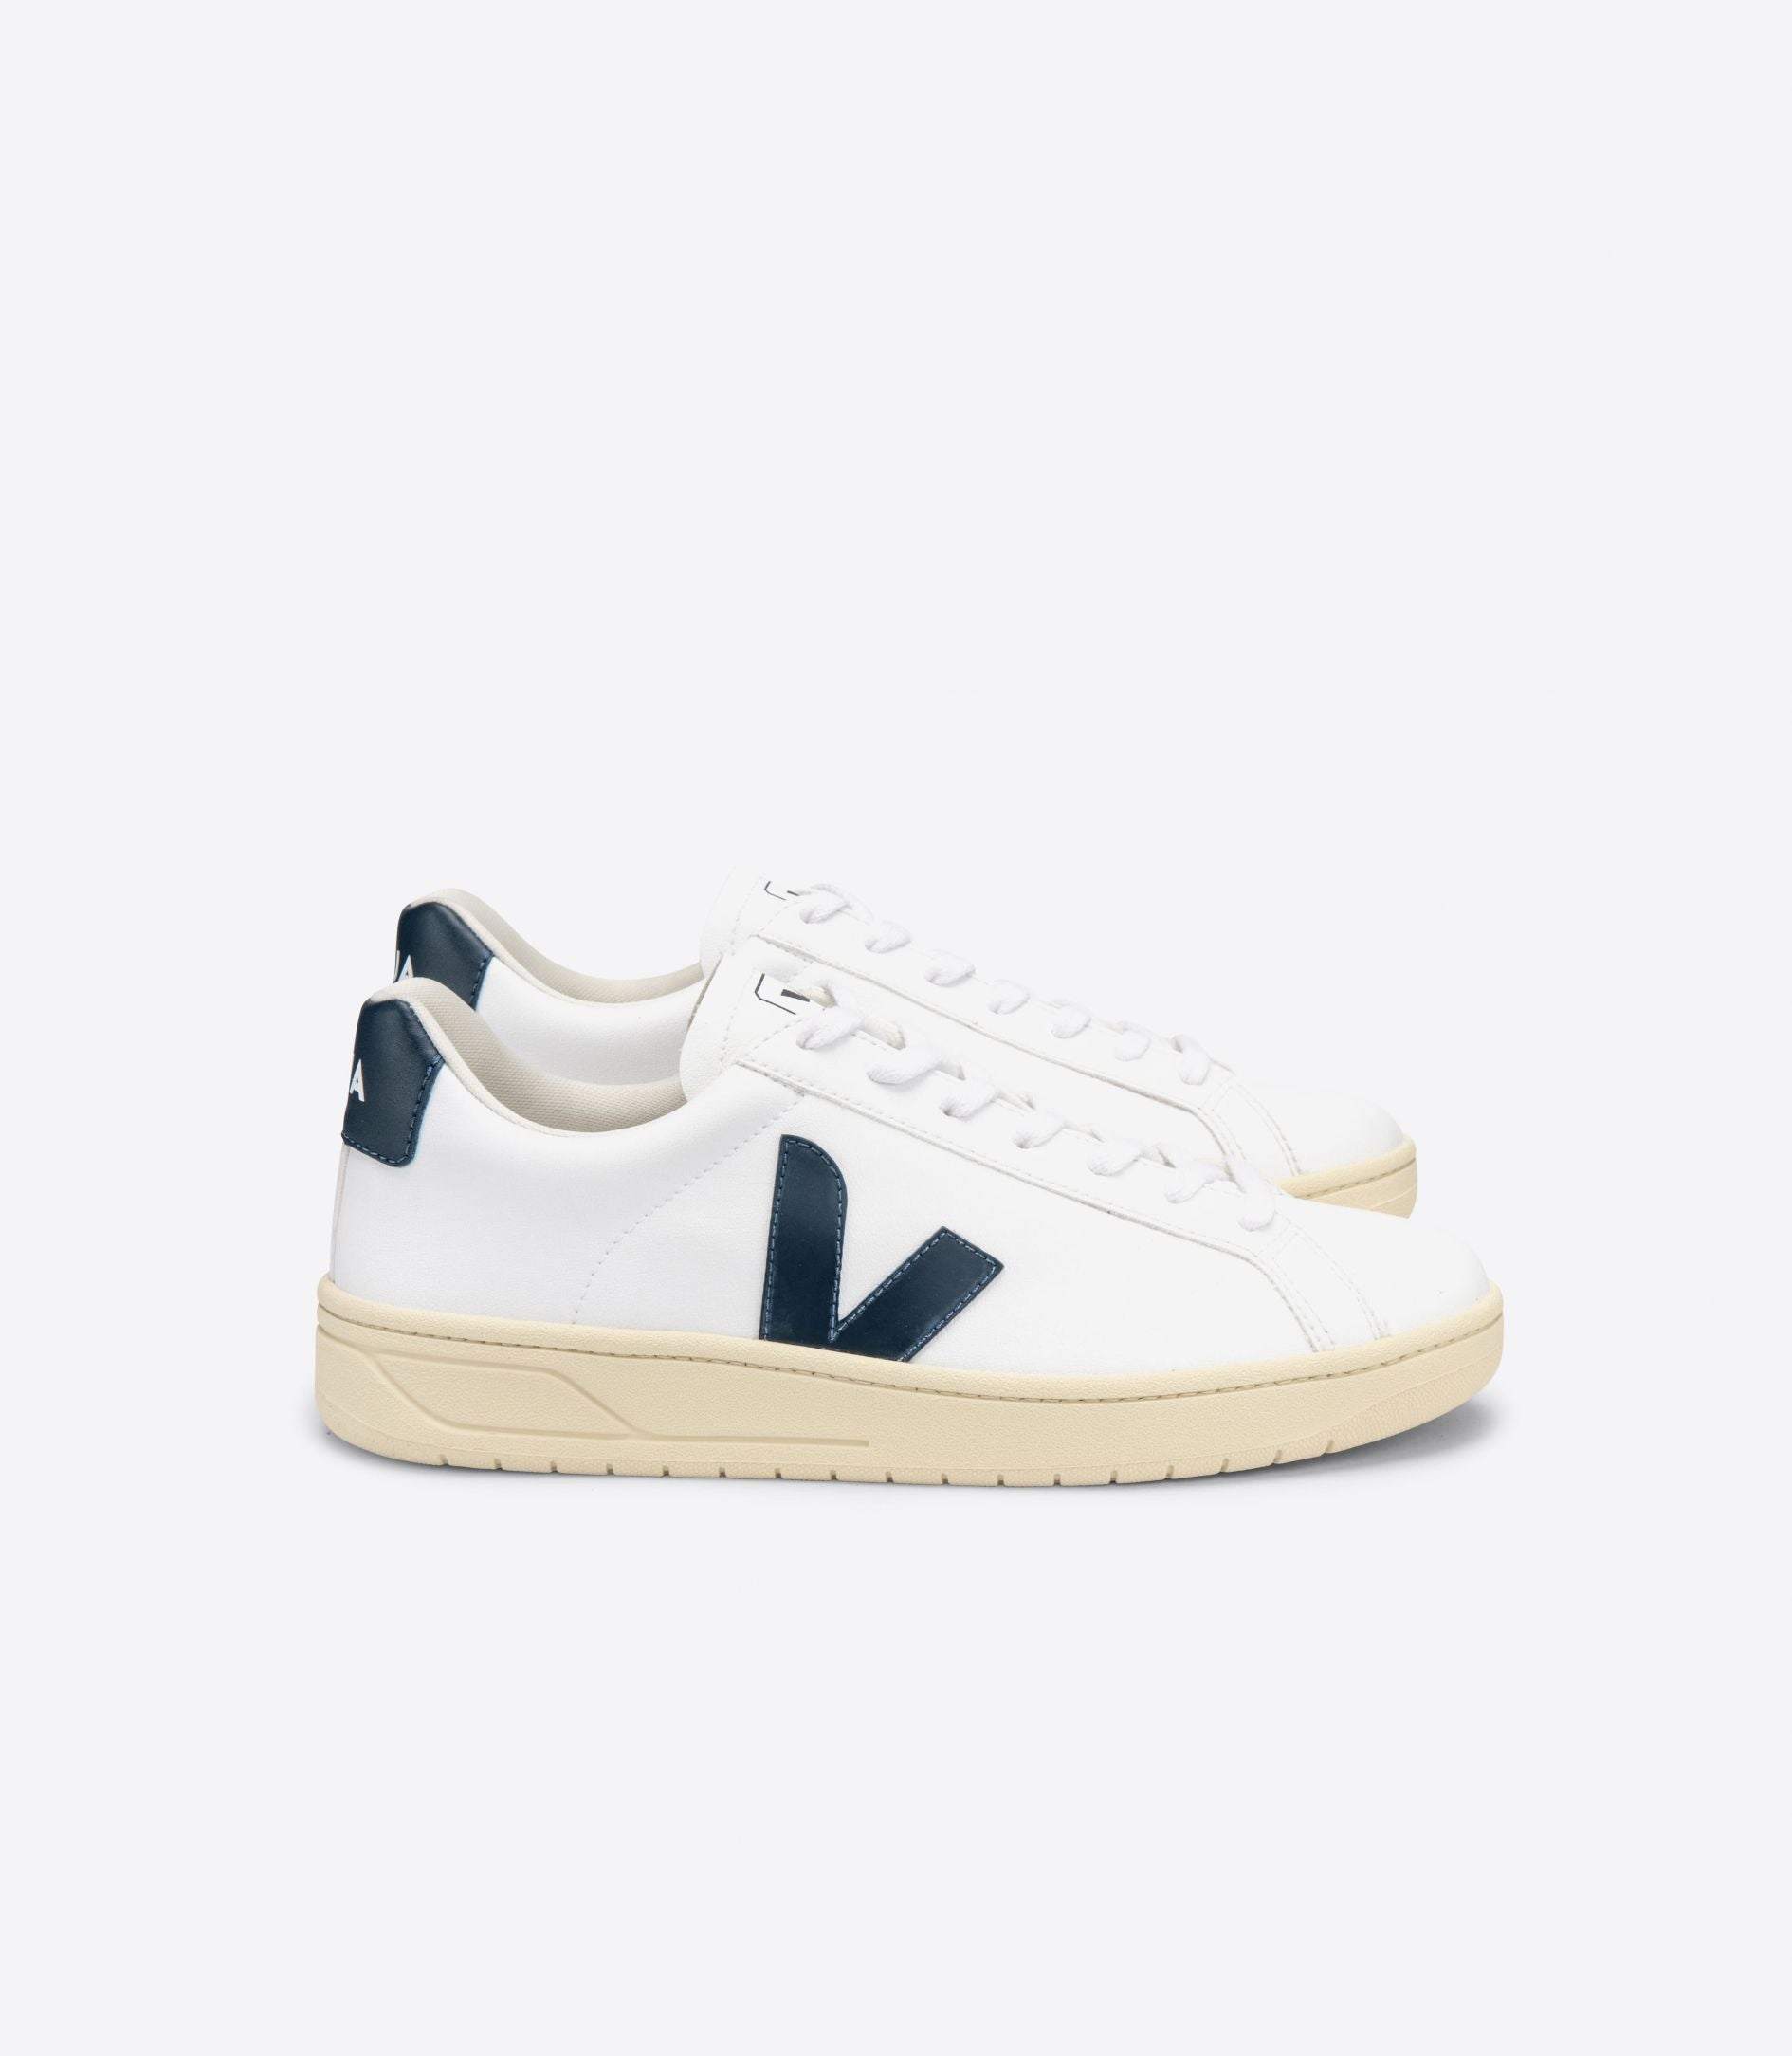 Lateral view of the Women's Urca by VEJA in the color White/Nautico